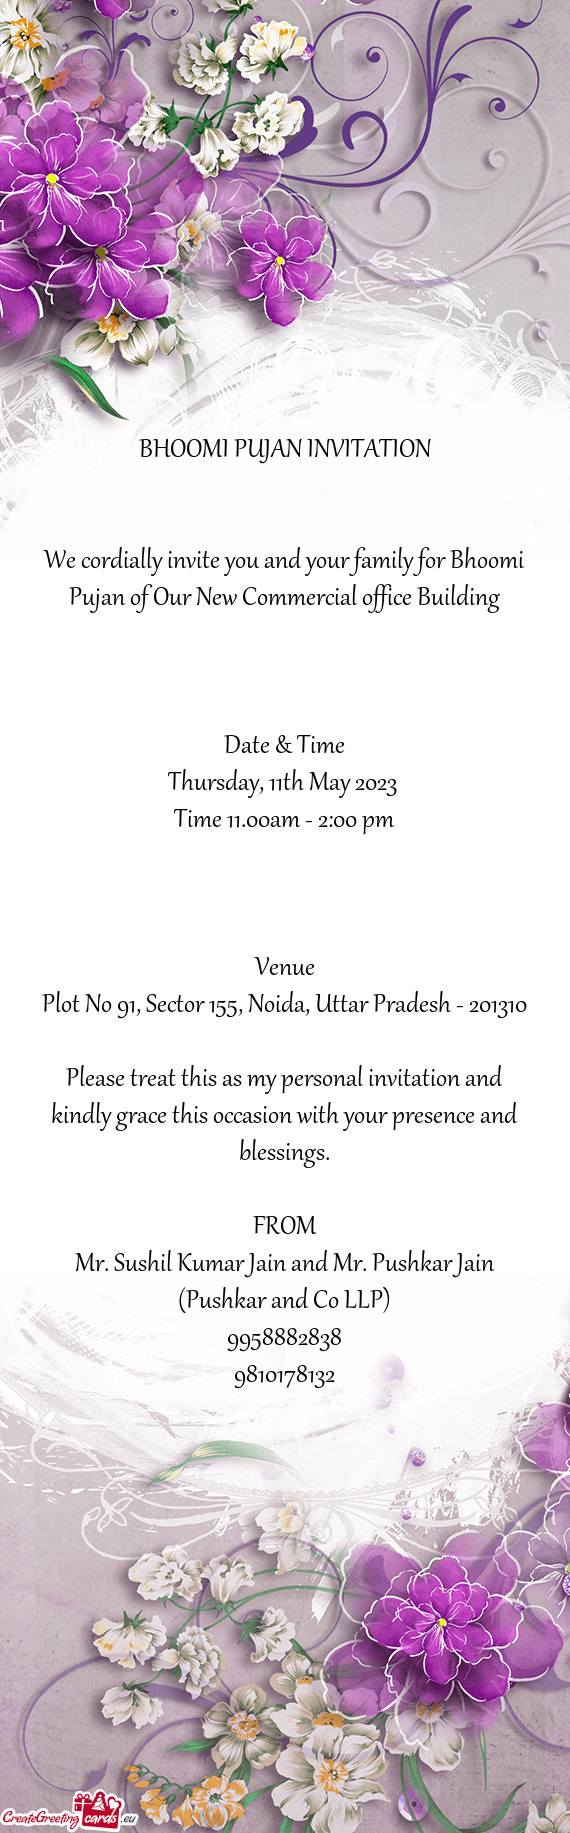 We cordially invite you and your family for Bhoomi Pujan of Our New Commercial office Building